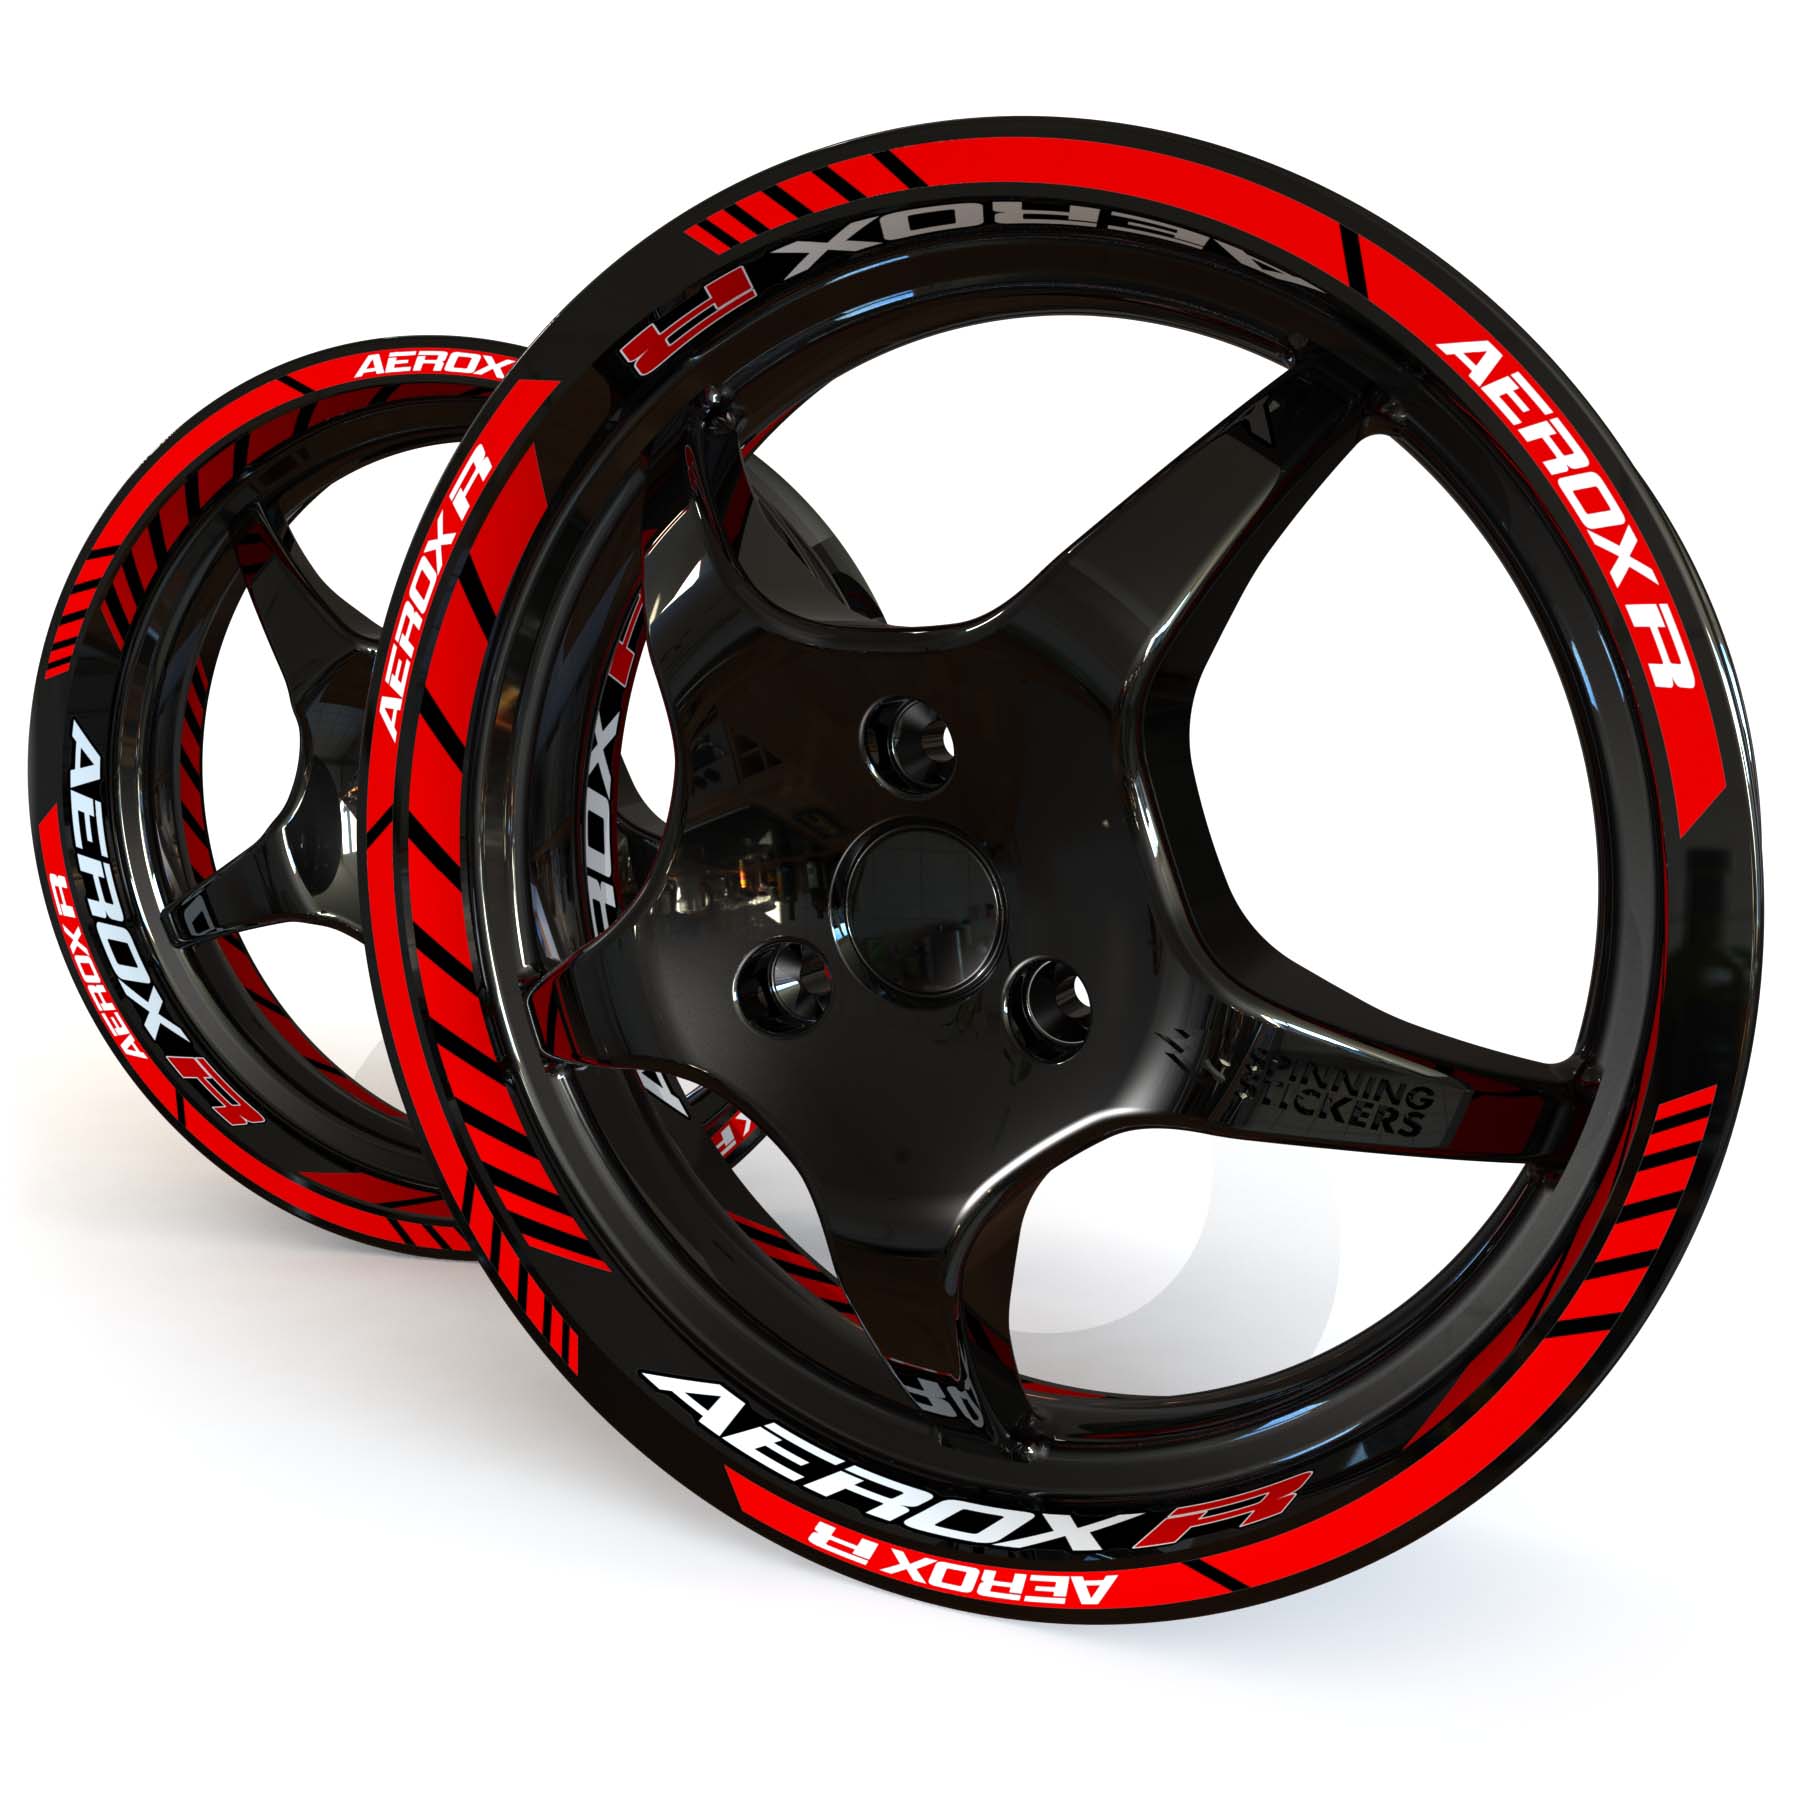 Red and white Yamaha Aerox R wheel stickers on a black 12 inch moped rim